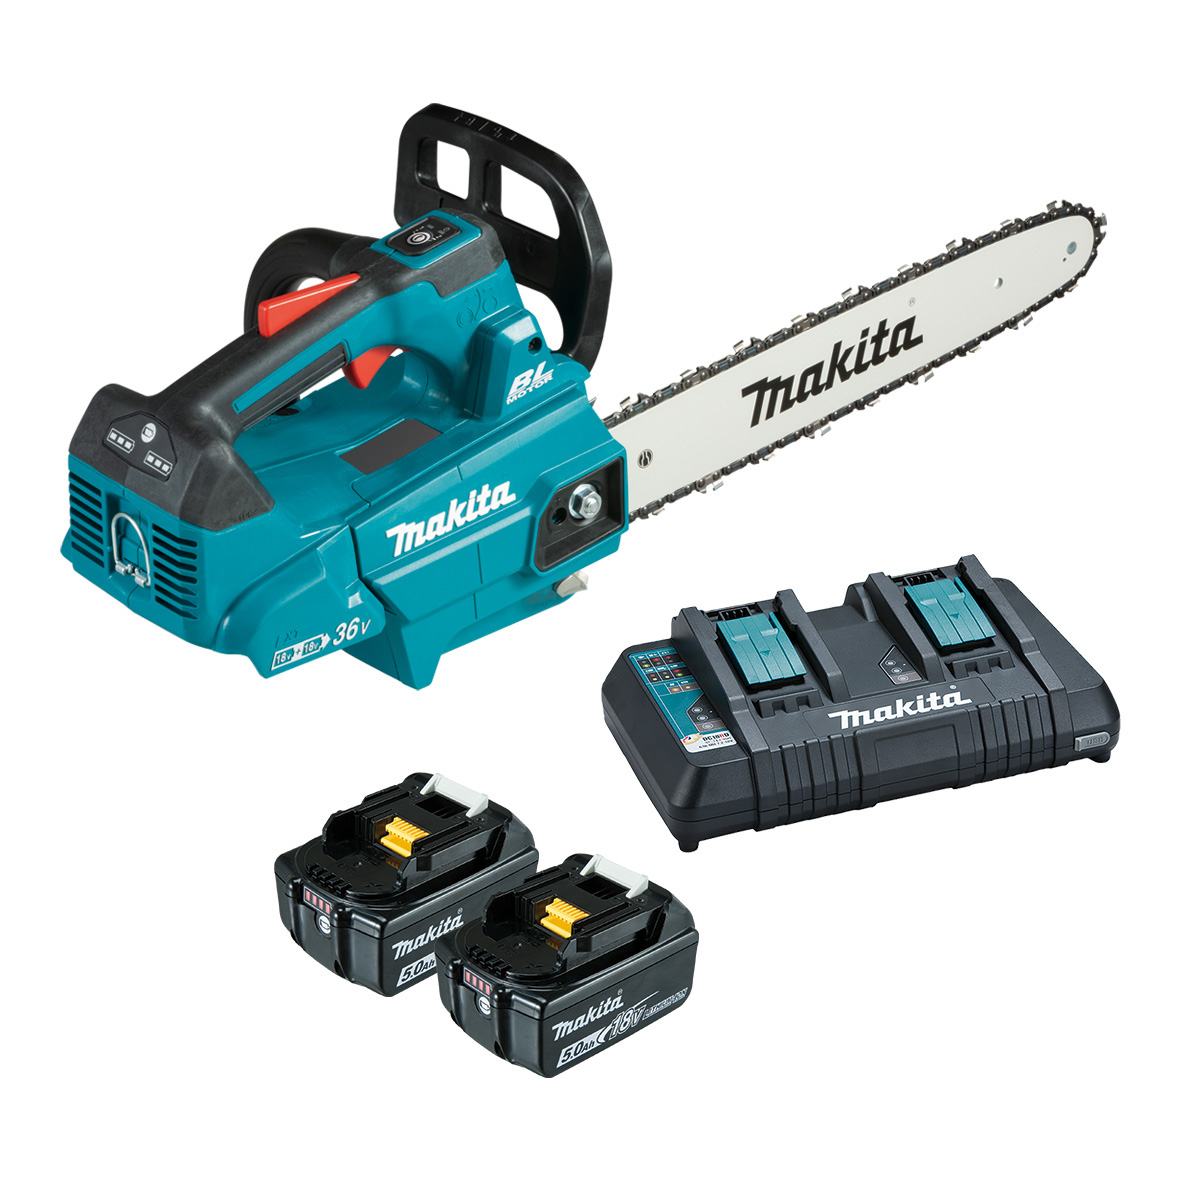 Makita 18Vx2 300mm Brushless Top Handle Chainsaw 5.0Ah Set DUC306PT2